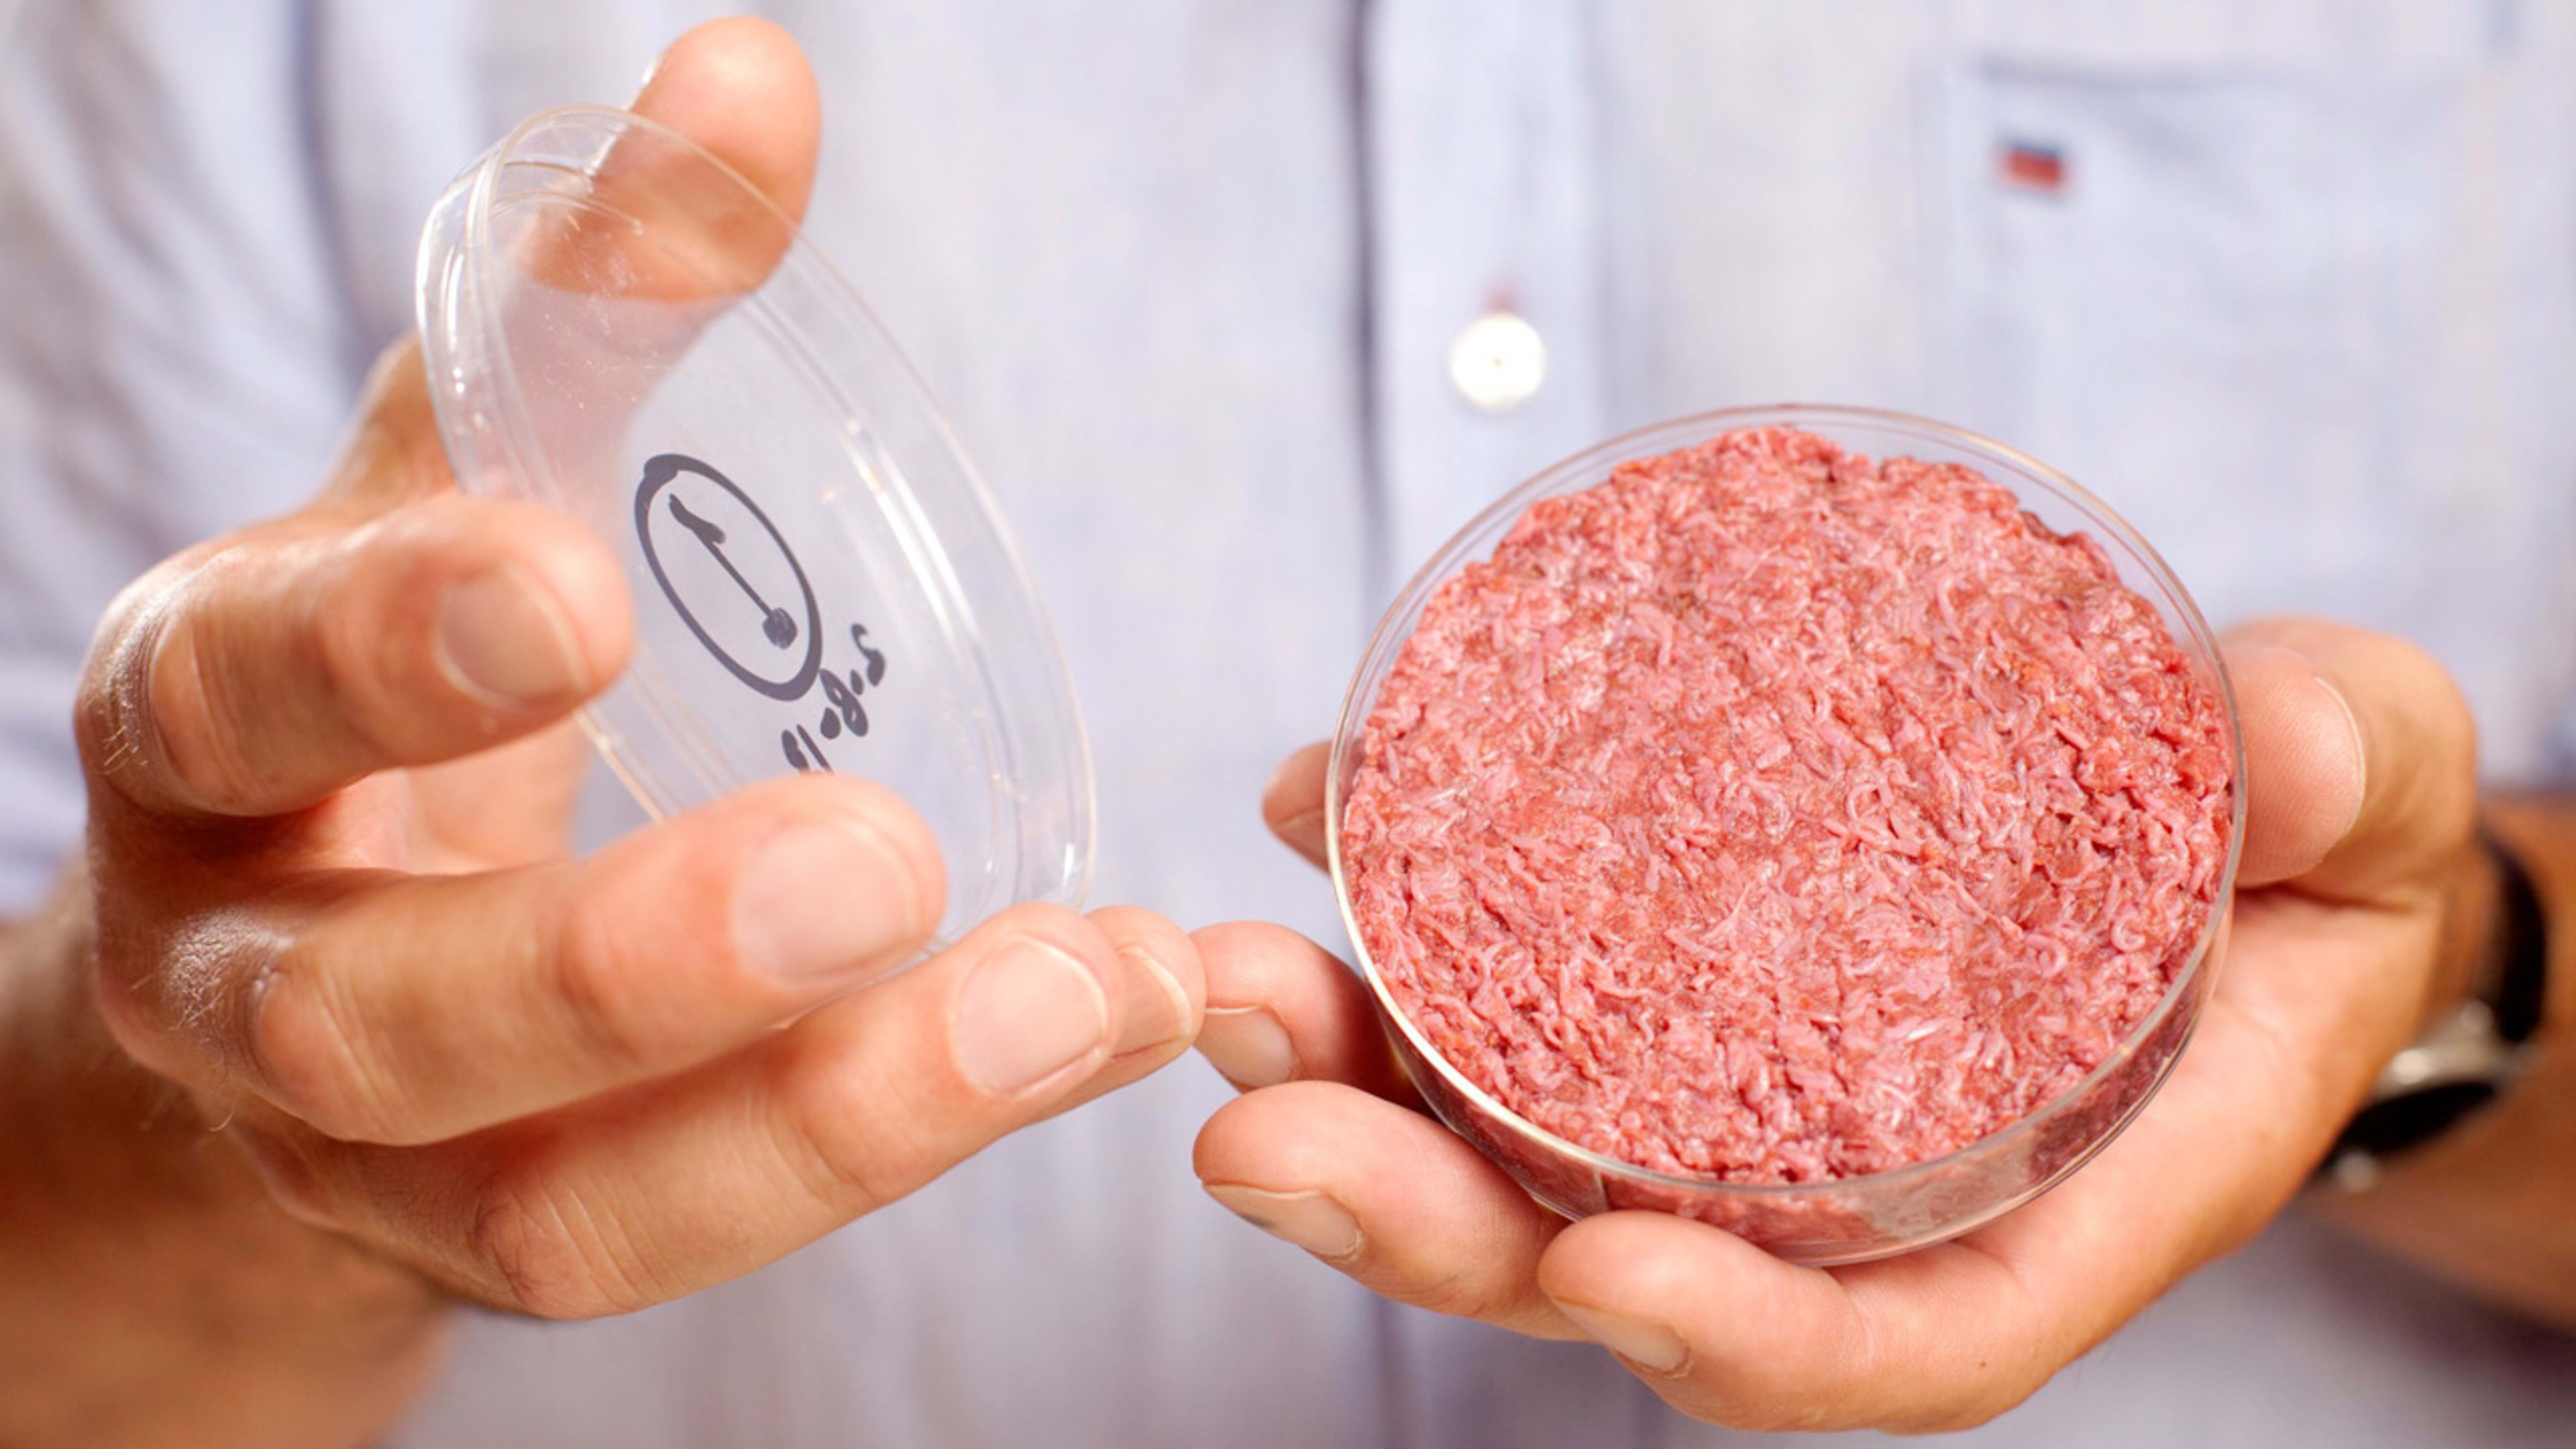 Most Americans will happily try eating lab-grown “clean meat”